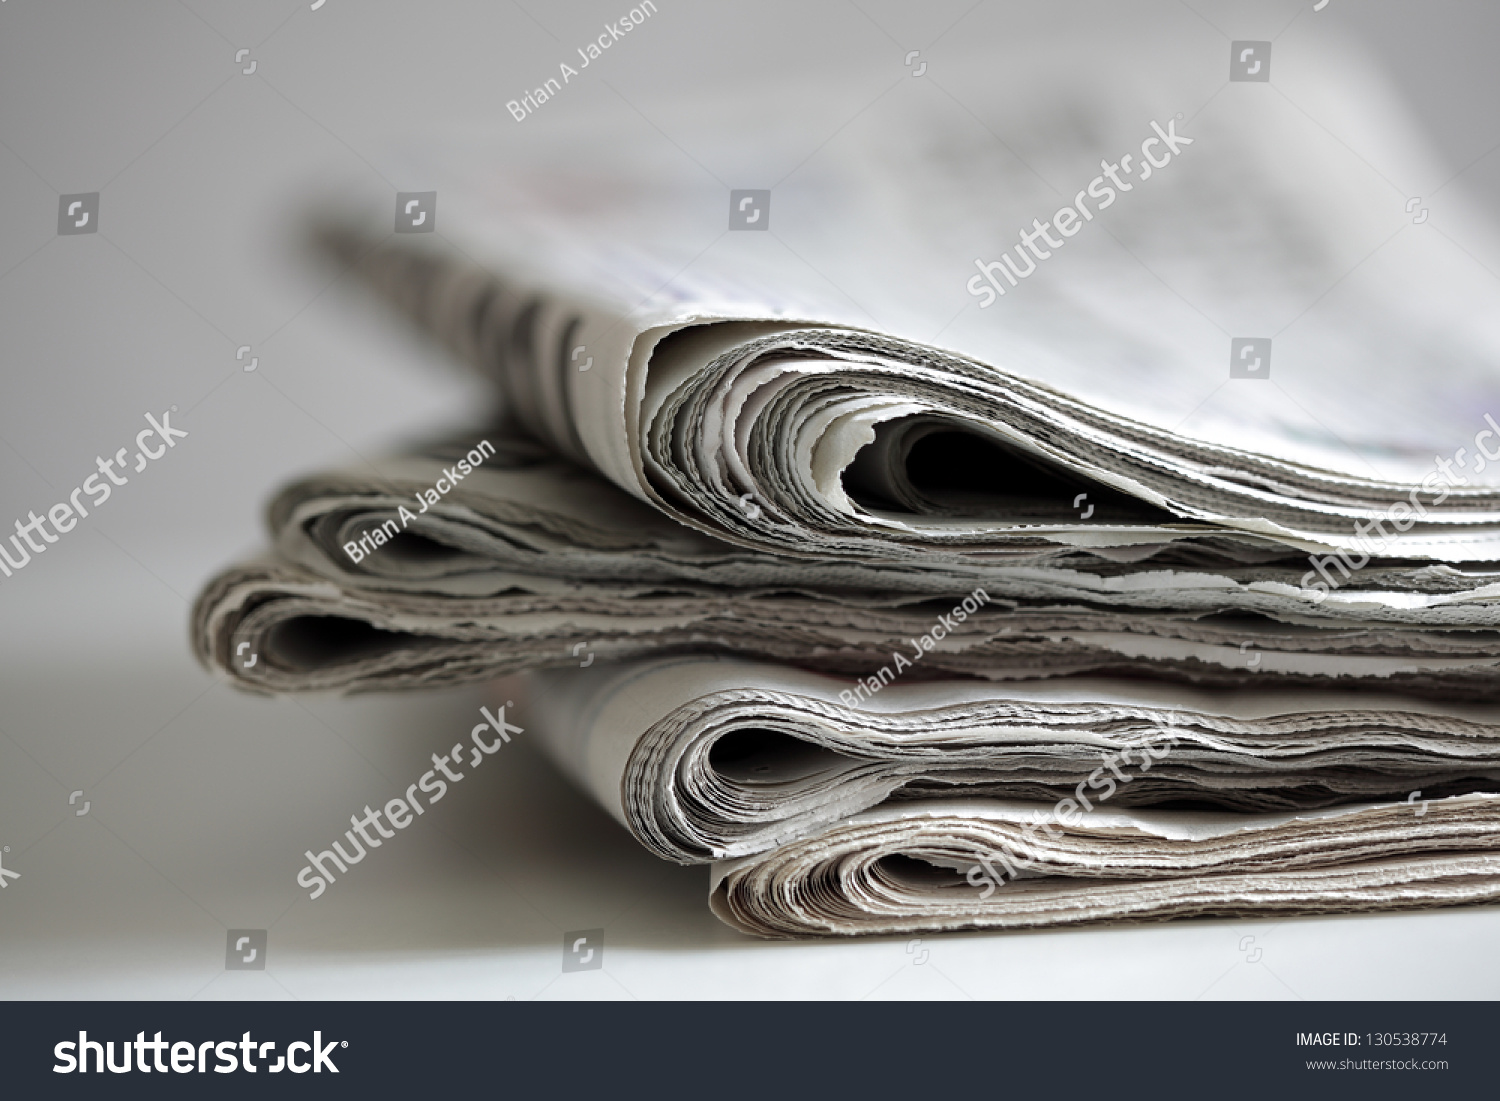 Newspapers folded and stacked concept for global communications #130538774